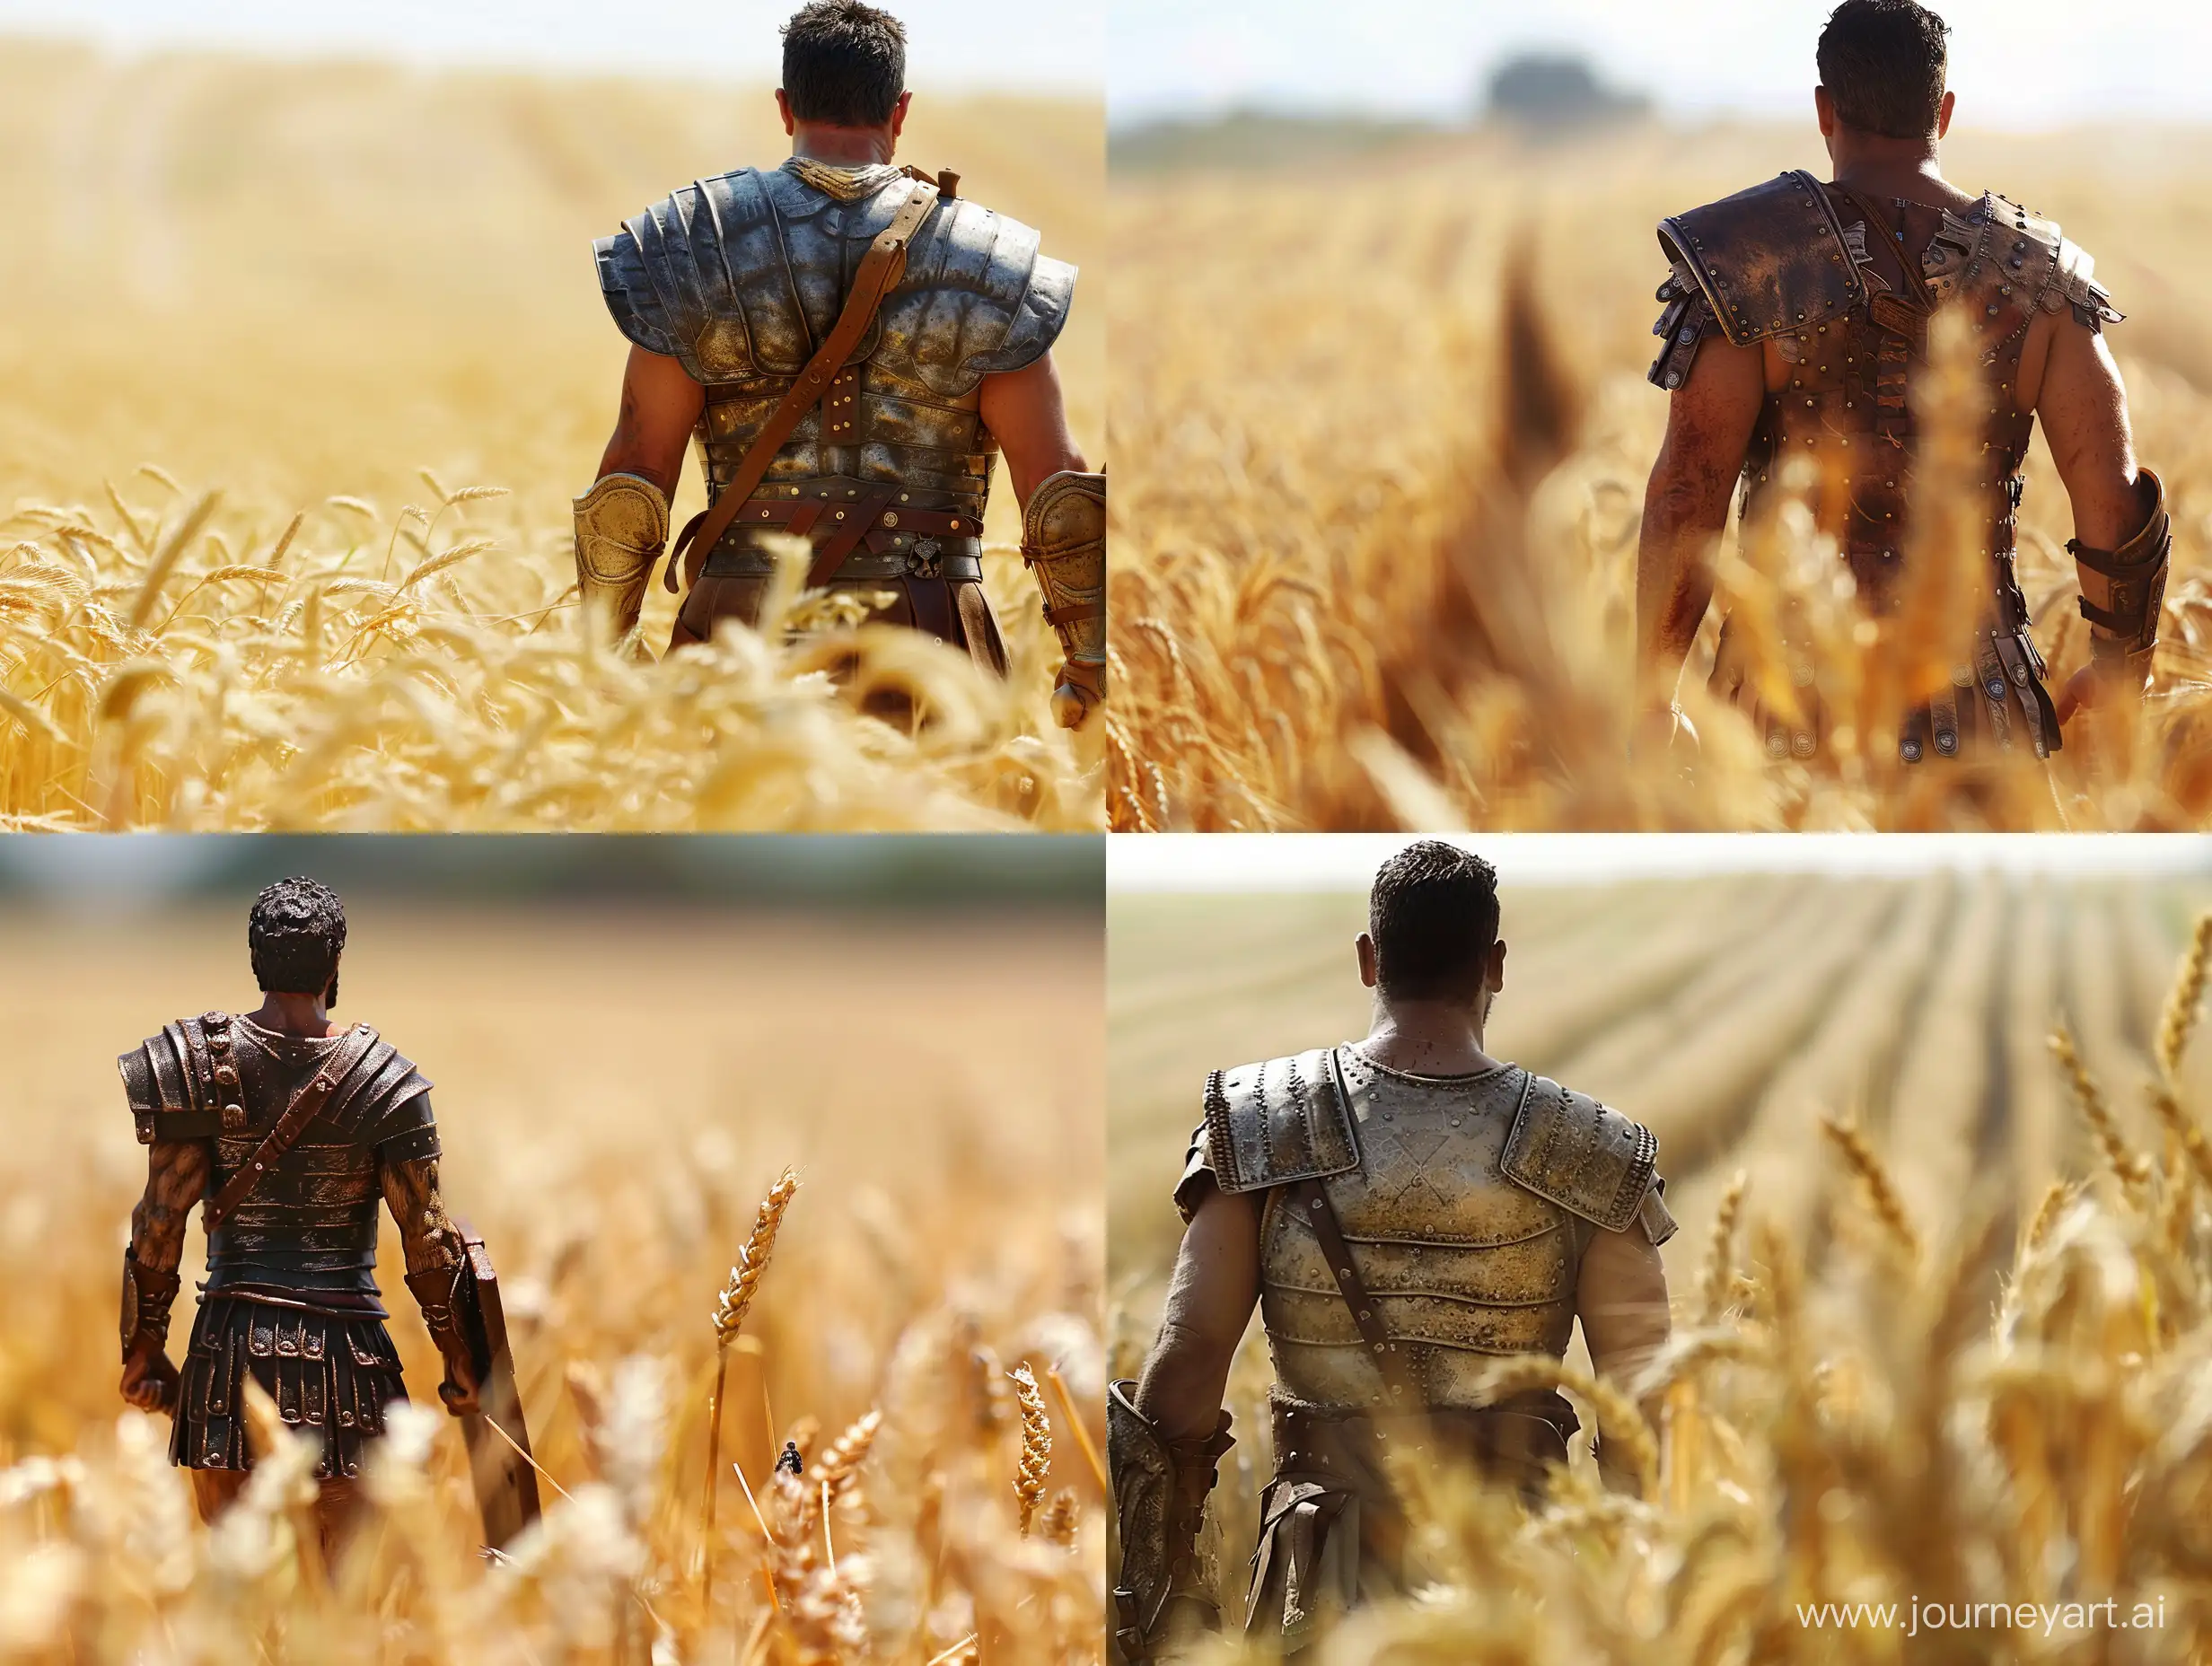 Majestic-Gladiator-Strolling-Through-Wheat-Field-Captivating-Depth-of-Field-Shot-with-Canon-EOS-5D